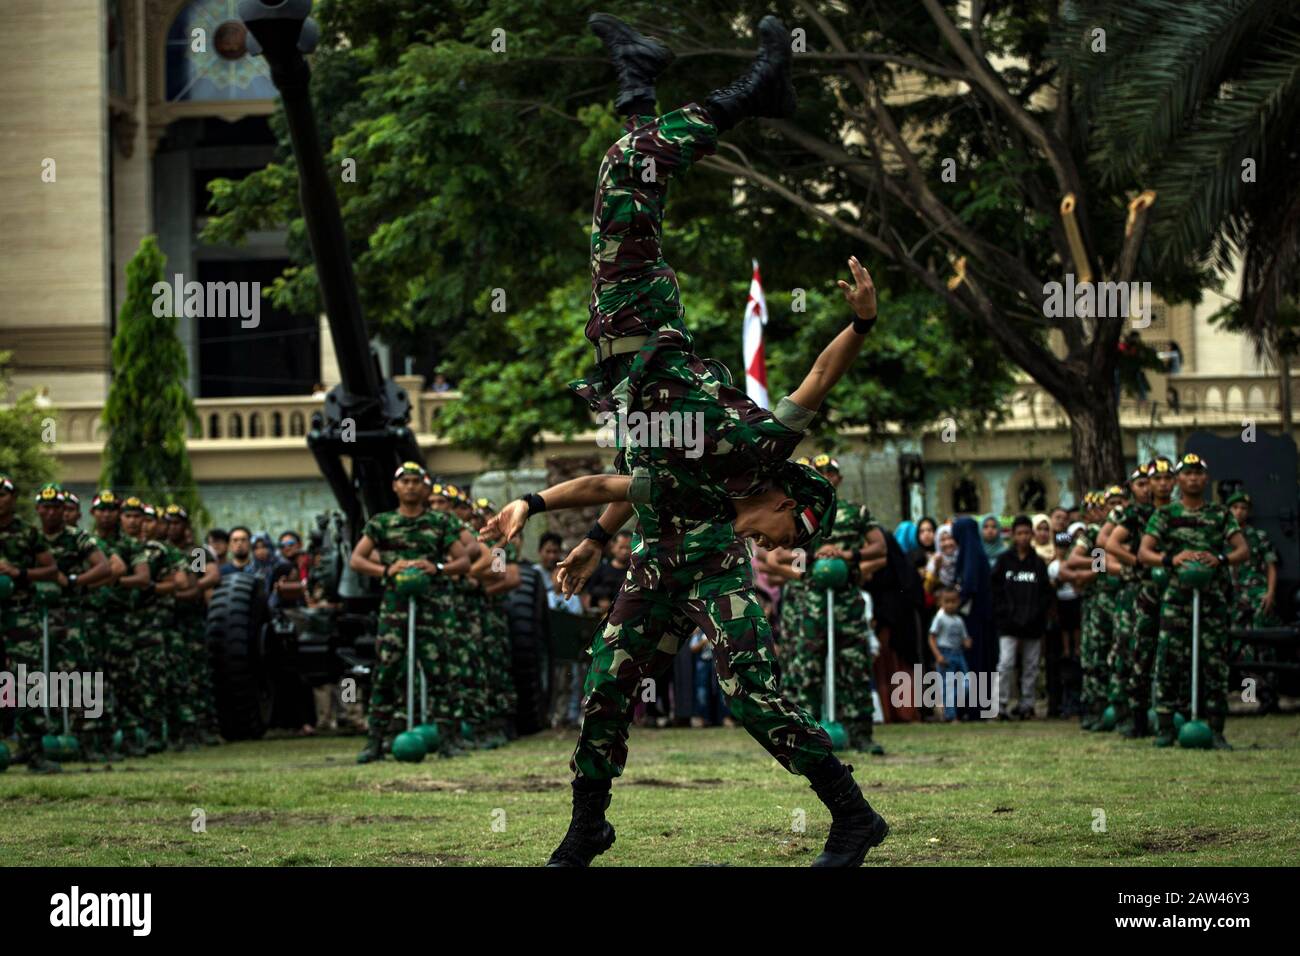 Indonesian Armed Forces perform capabilities at the 74th anniversary of the Indonesian National Armed Forces (TNI) in Hiraq Field, Lhokseumawe City, Aceh Province, Indonesia, Saturday, October 5, 2019. This year's anniversary of the TNI Anniversary was held with the theme 'Professional TNI's Pride of the People'. Stock Photo